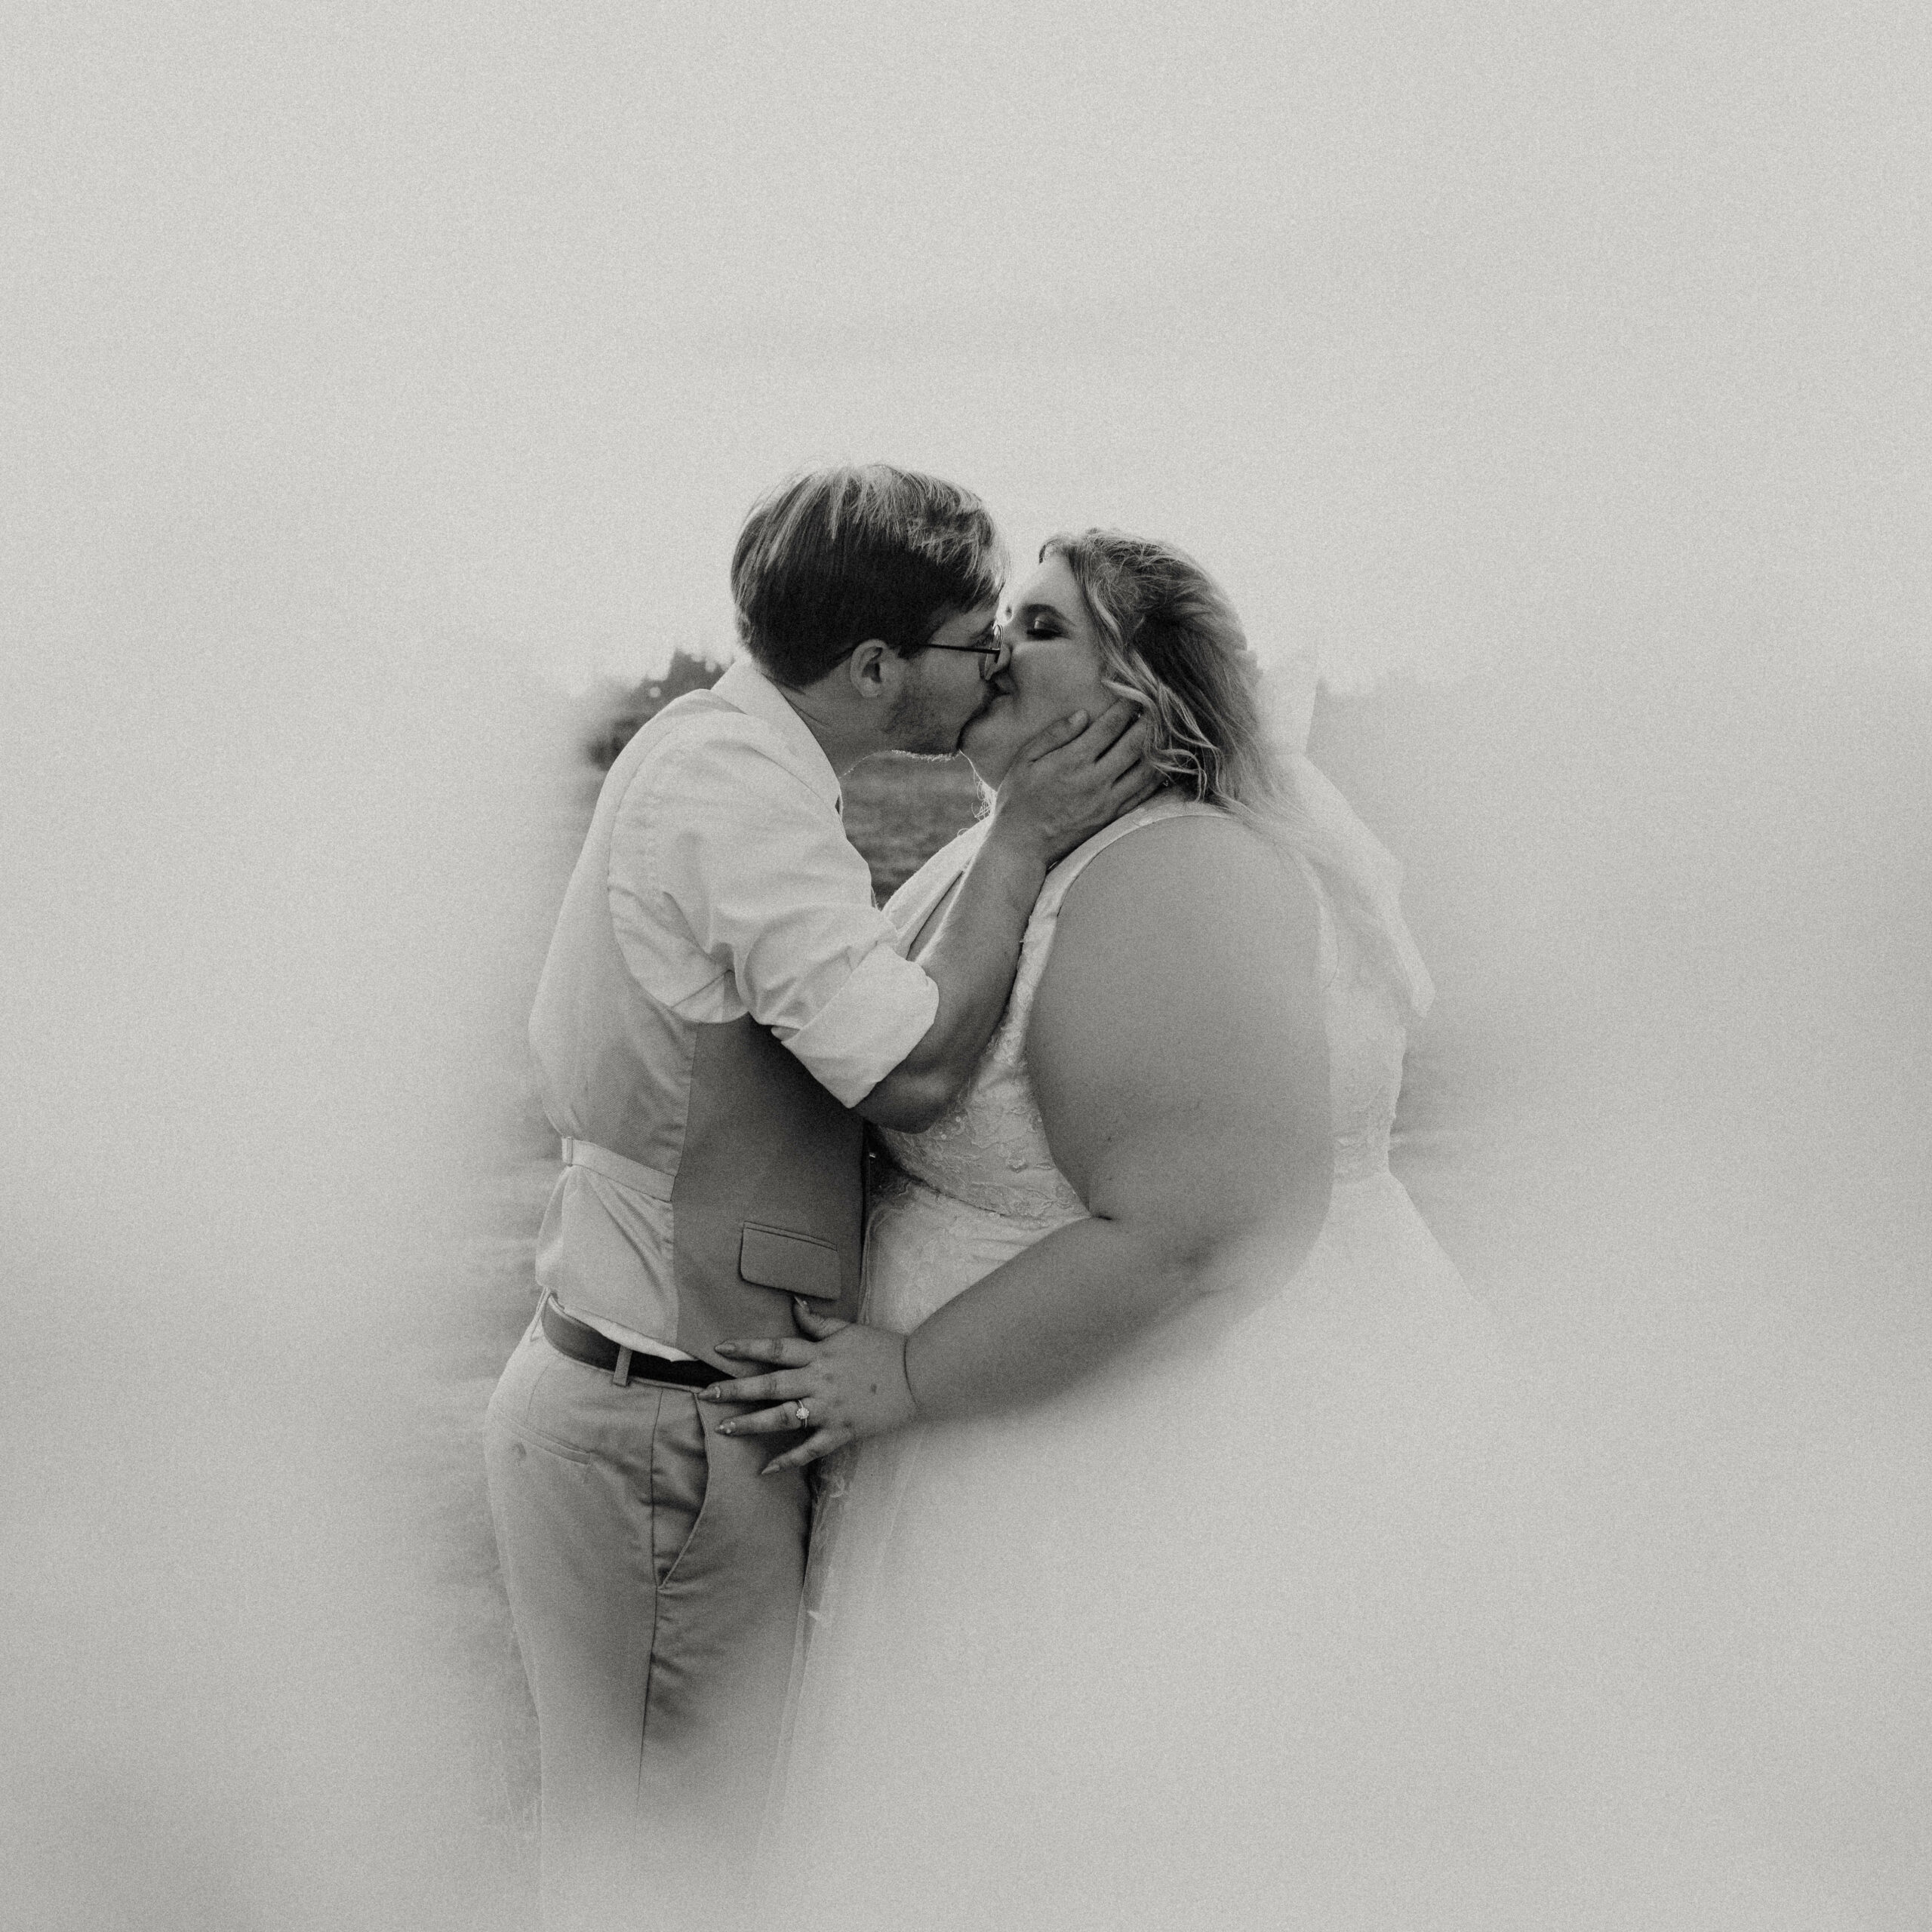 Bride and Groom Kissing On Wedding Day